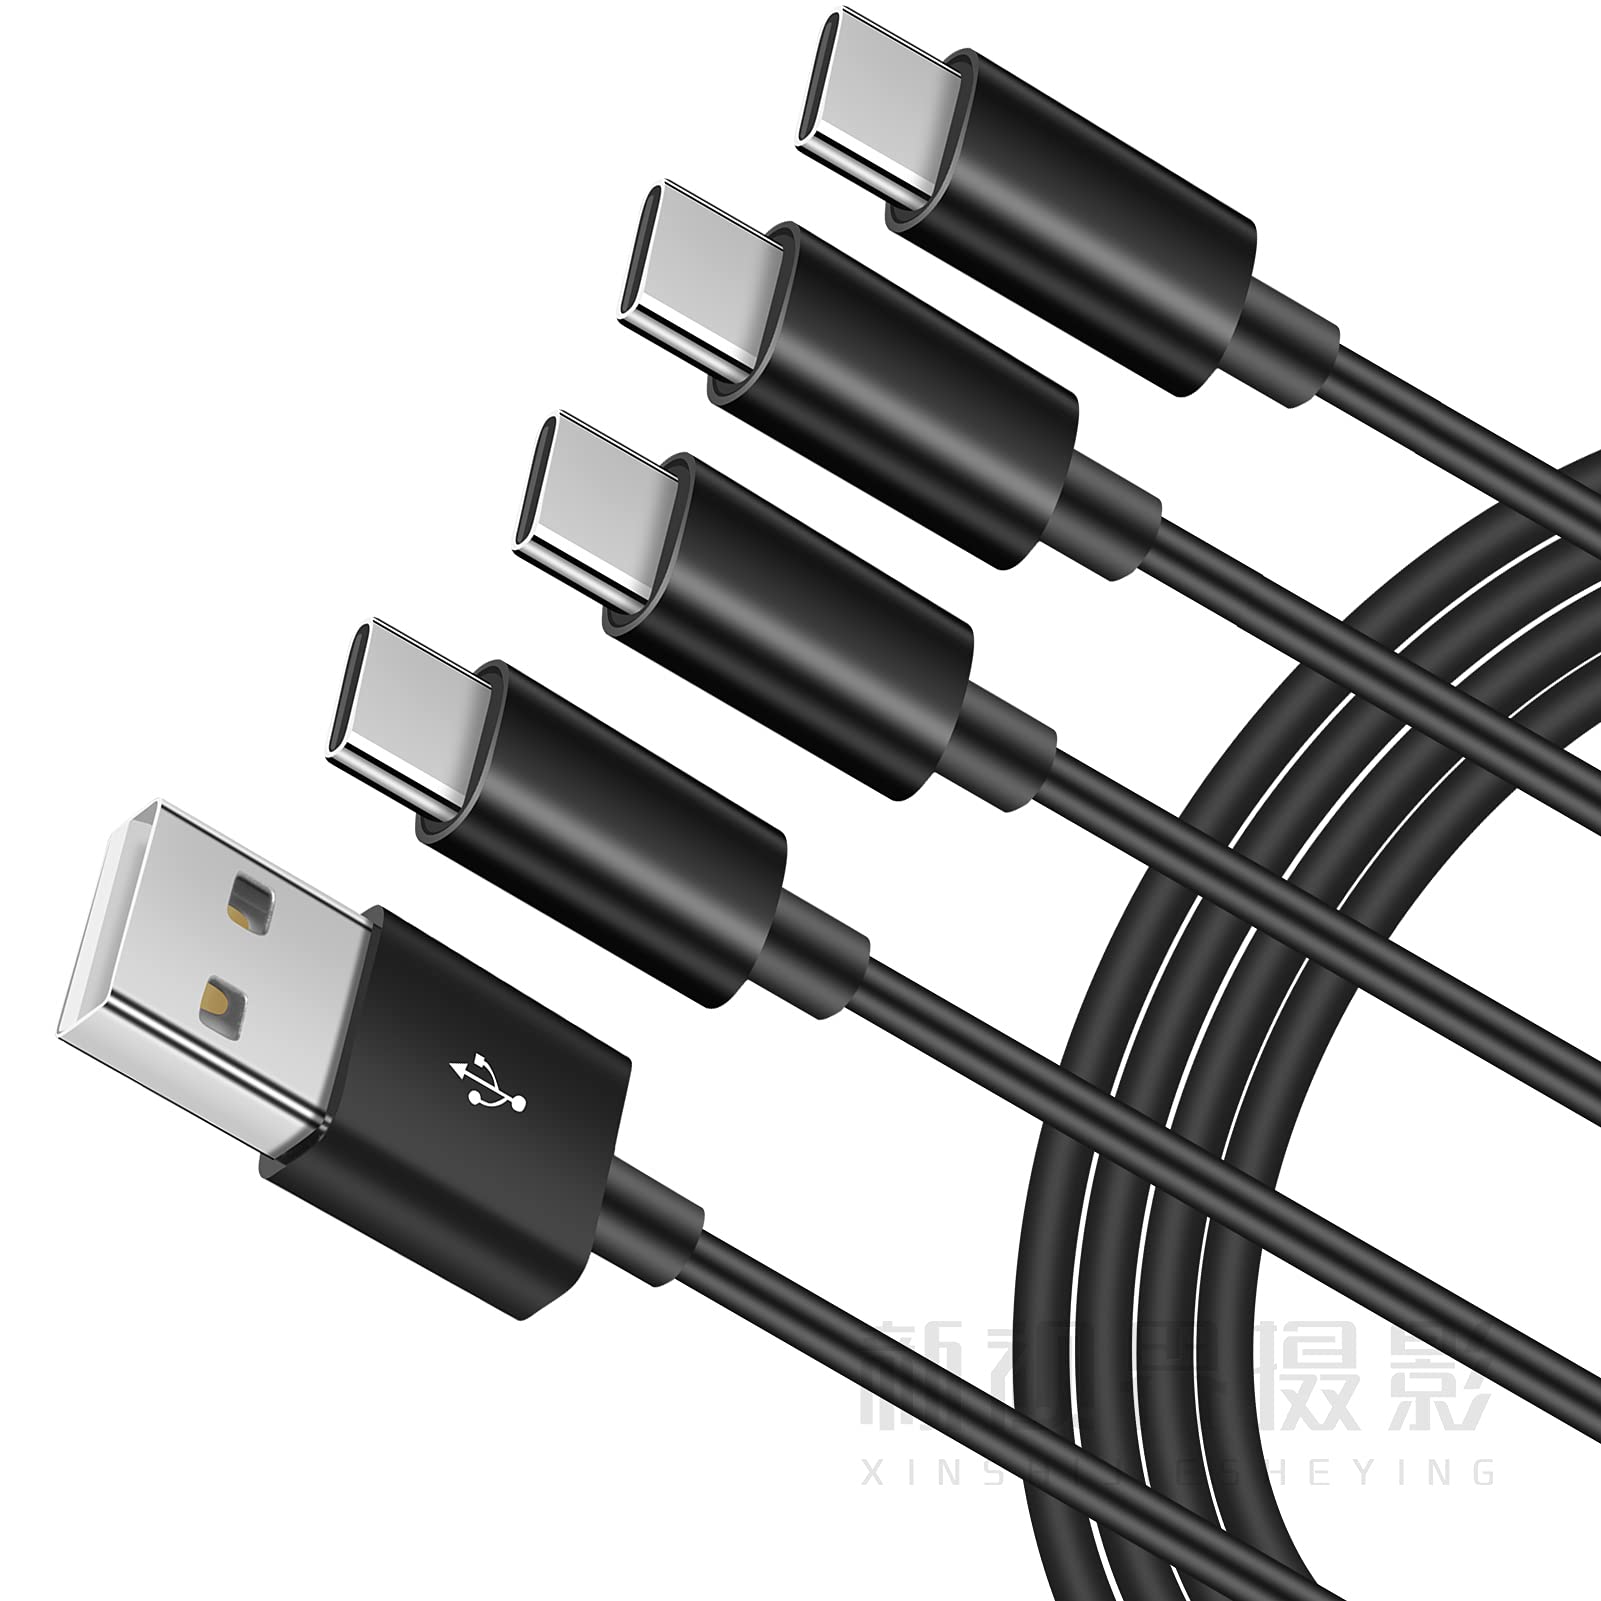 Image of different USB-C chargers.